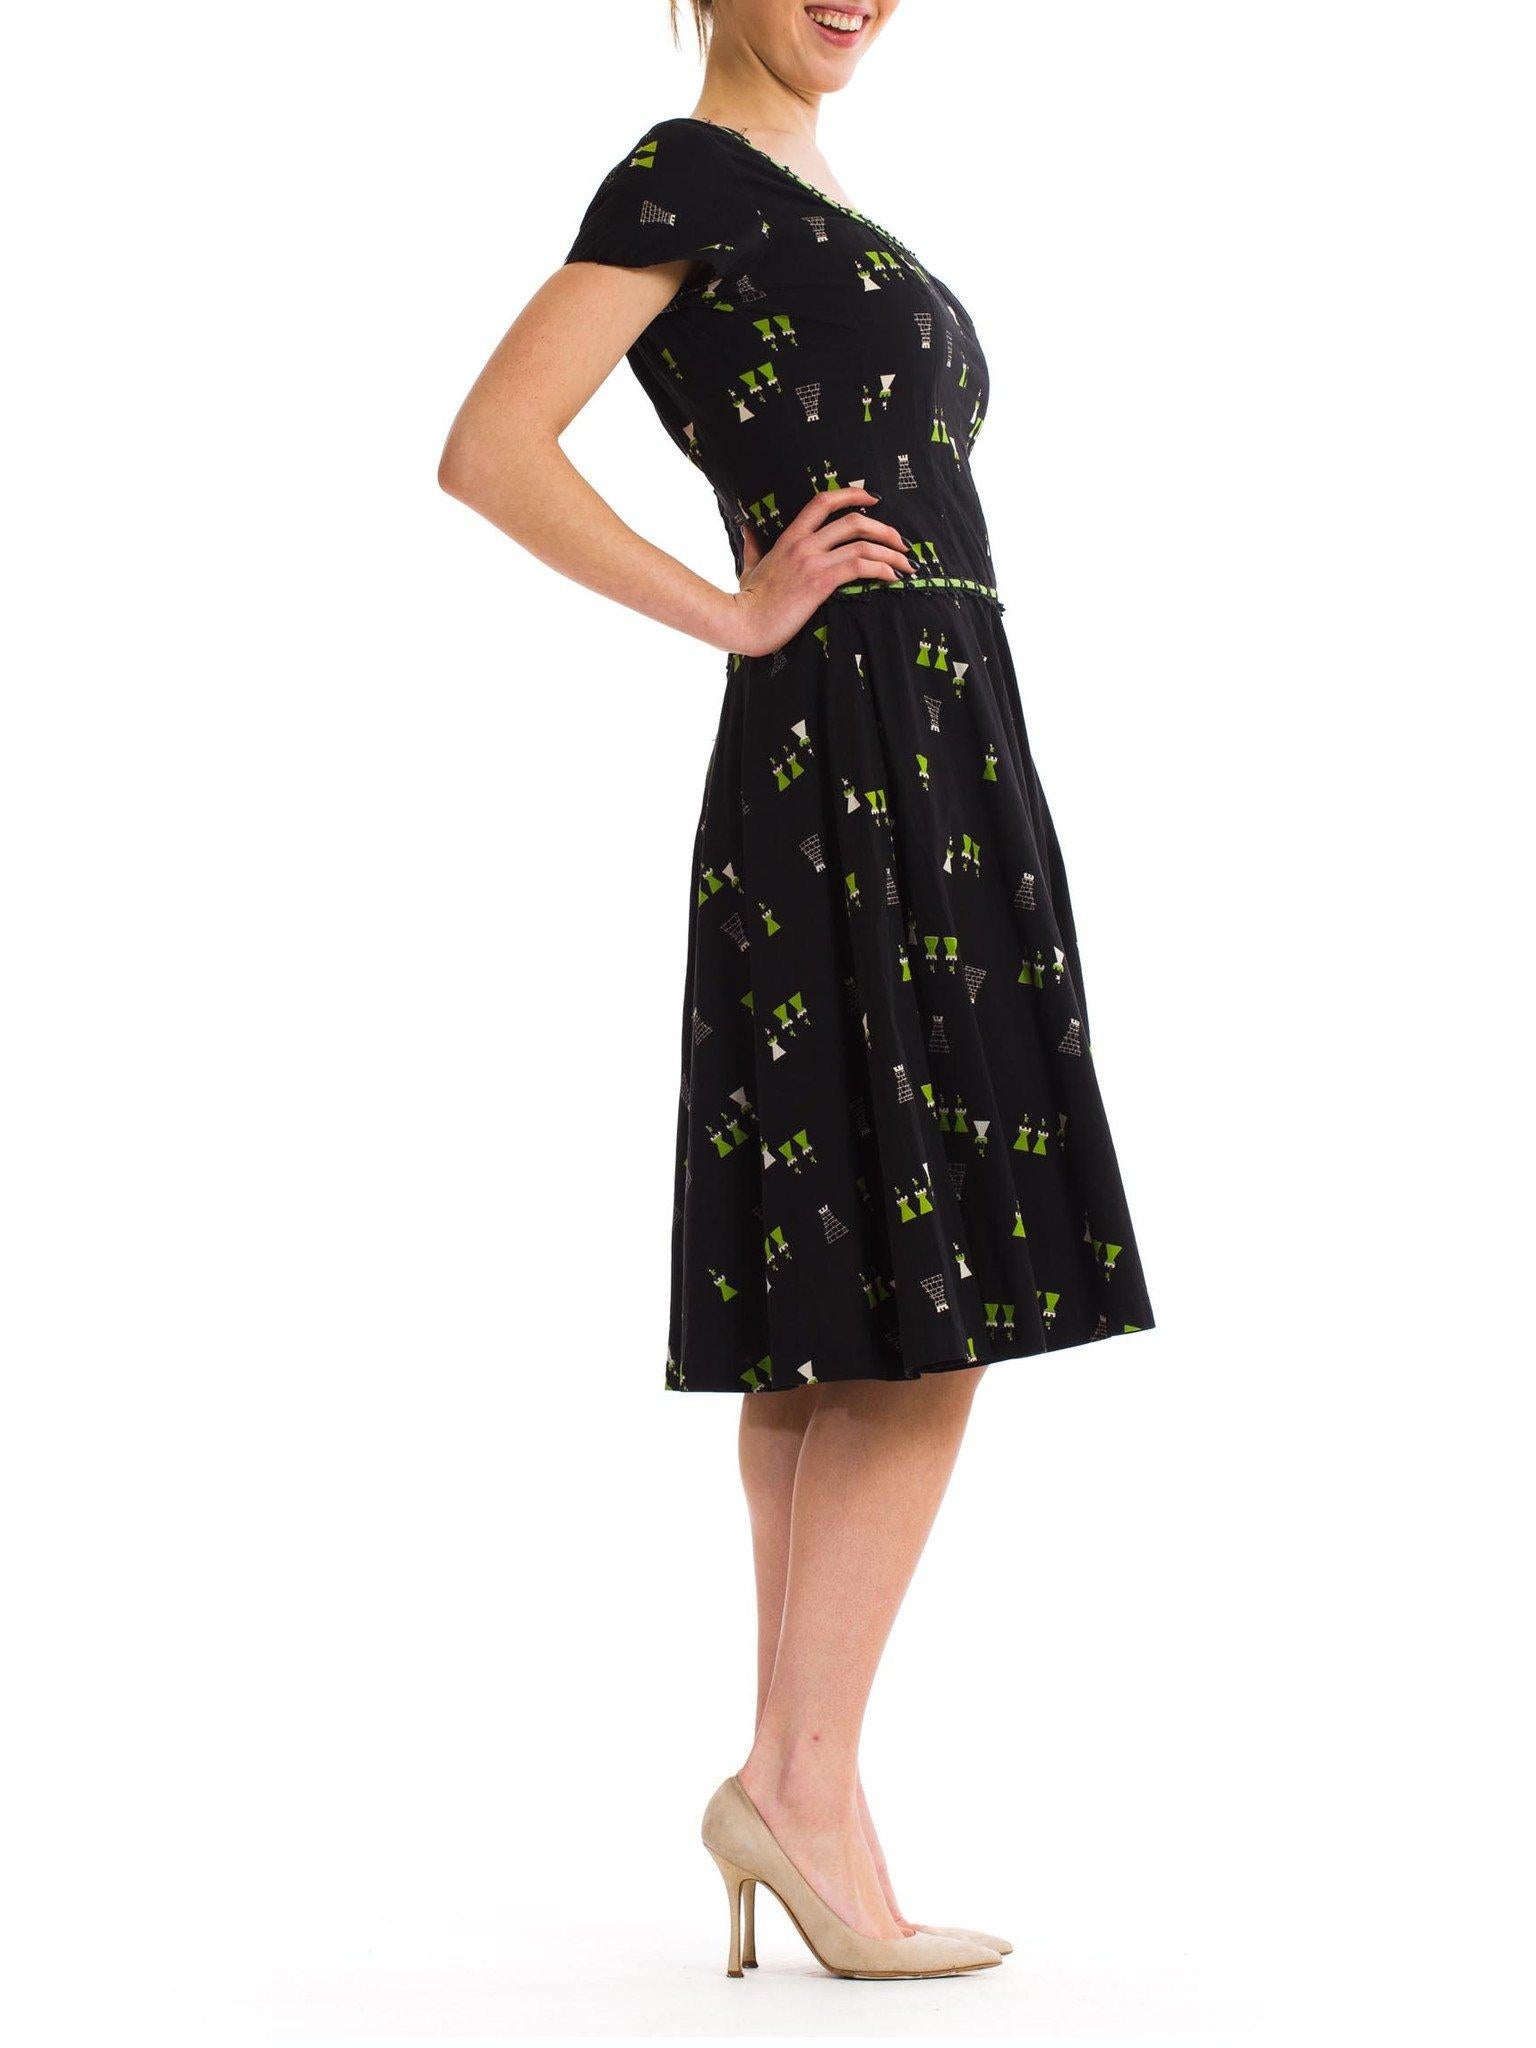 Women's 1950S Black Cotton Day Dress Printed With Cute Green Castles For Sale